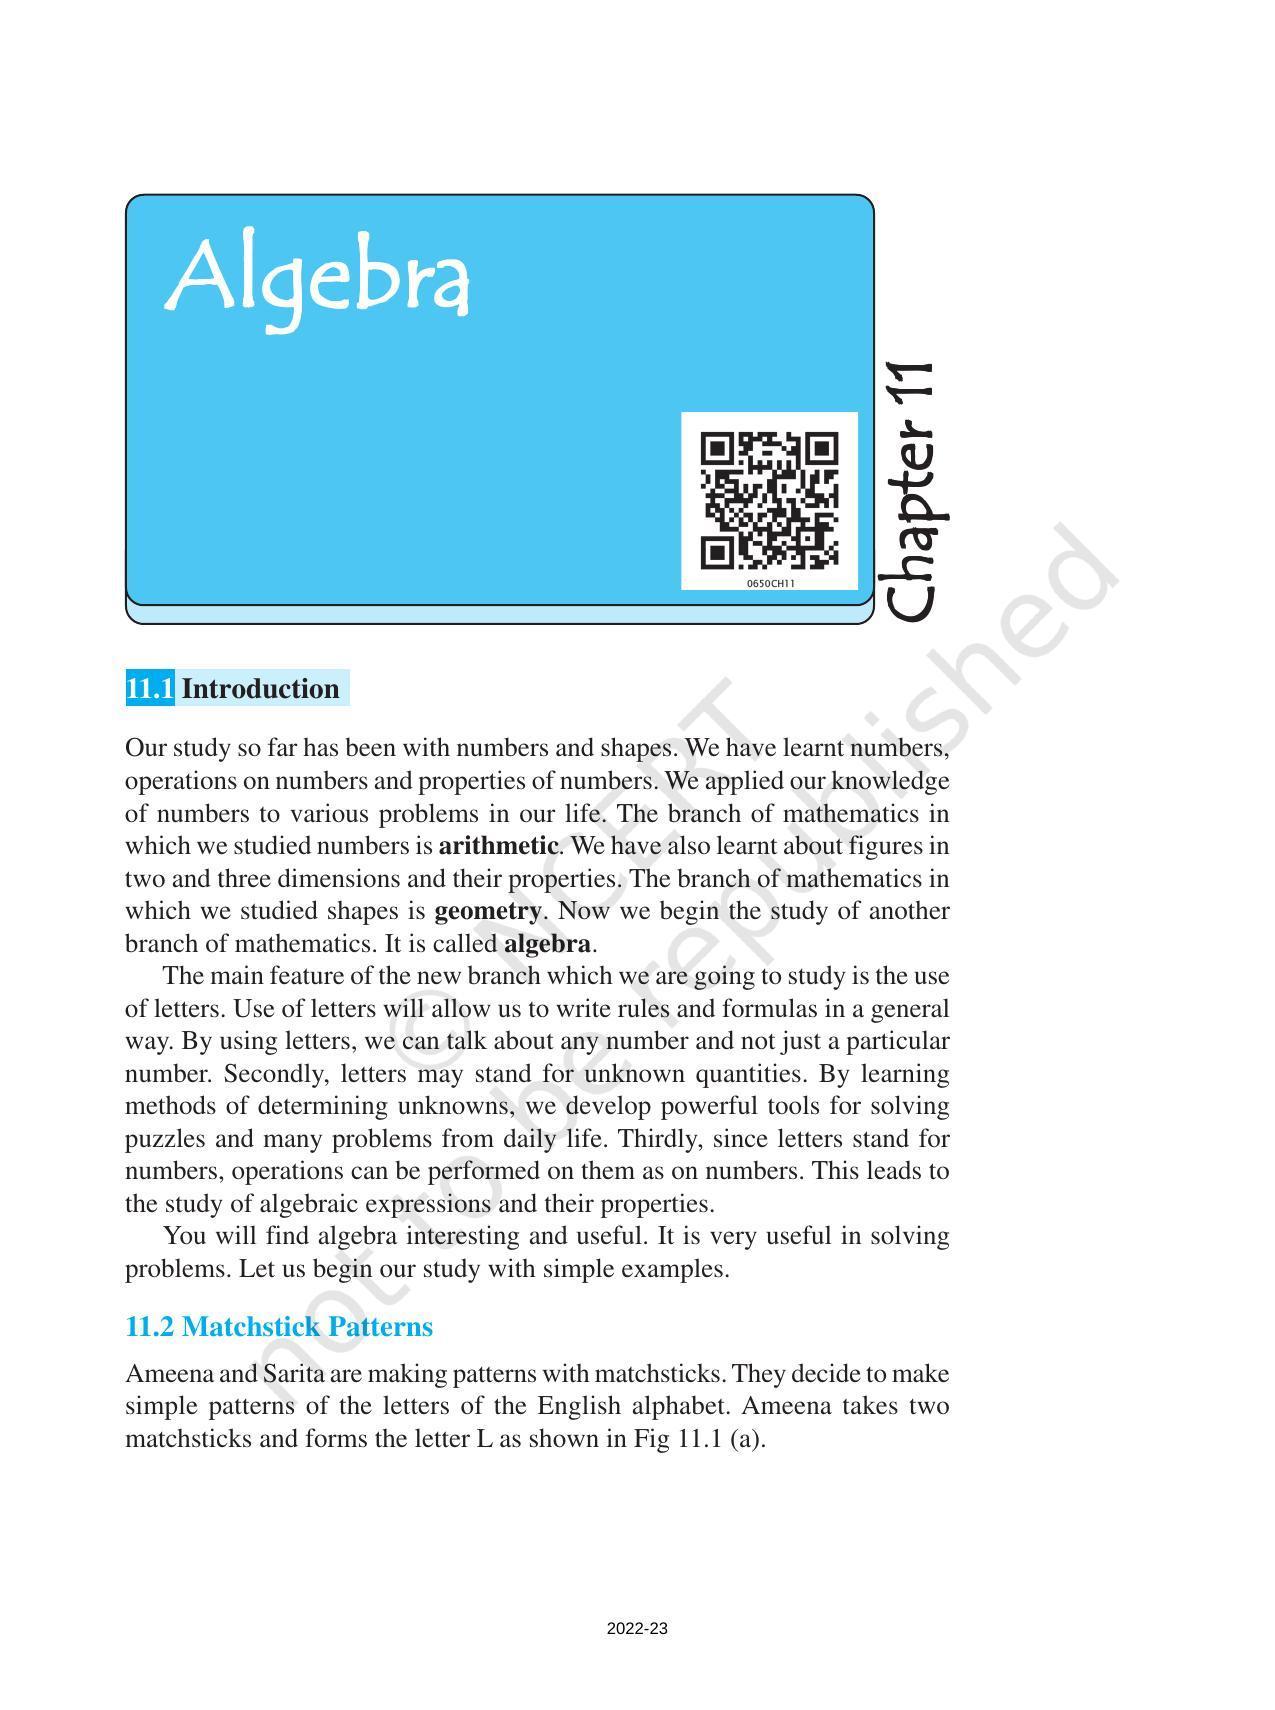 NCERT Book for Class 6 Maths: Chapter 11-Algebra - Page 1